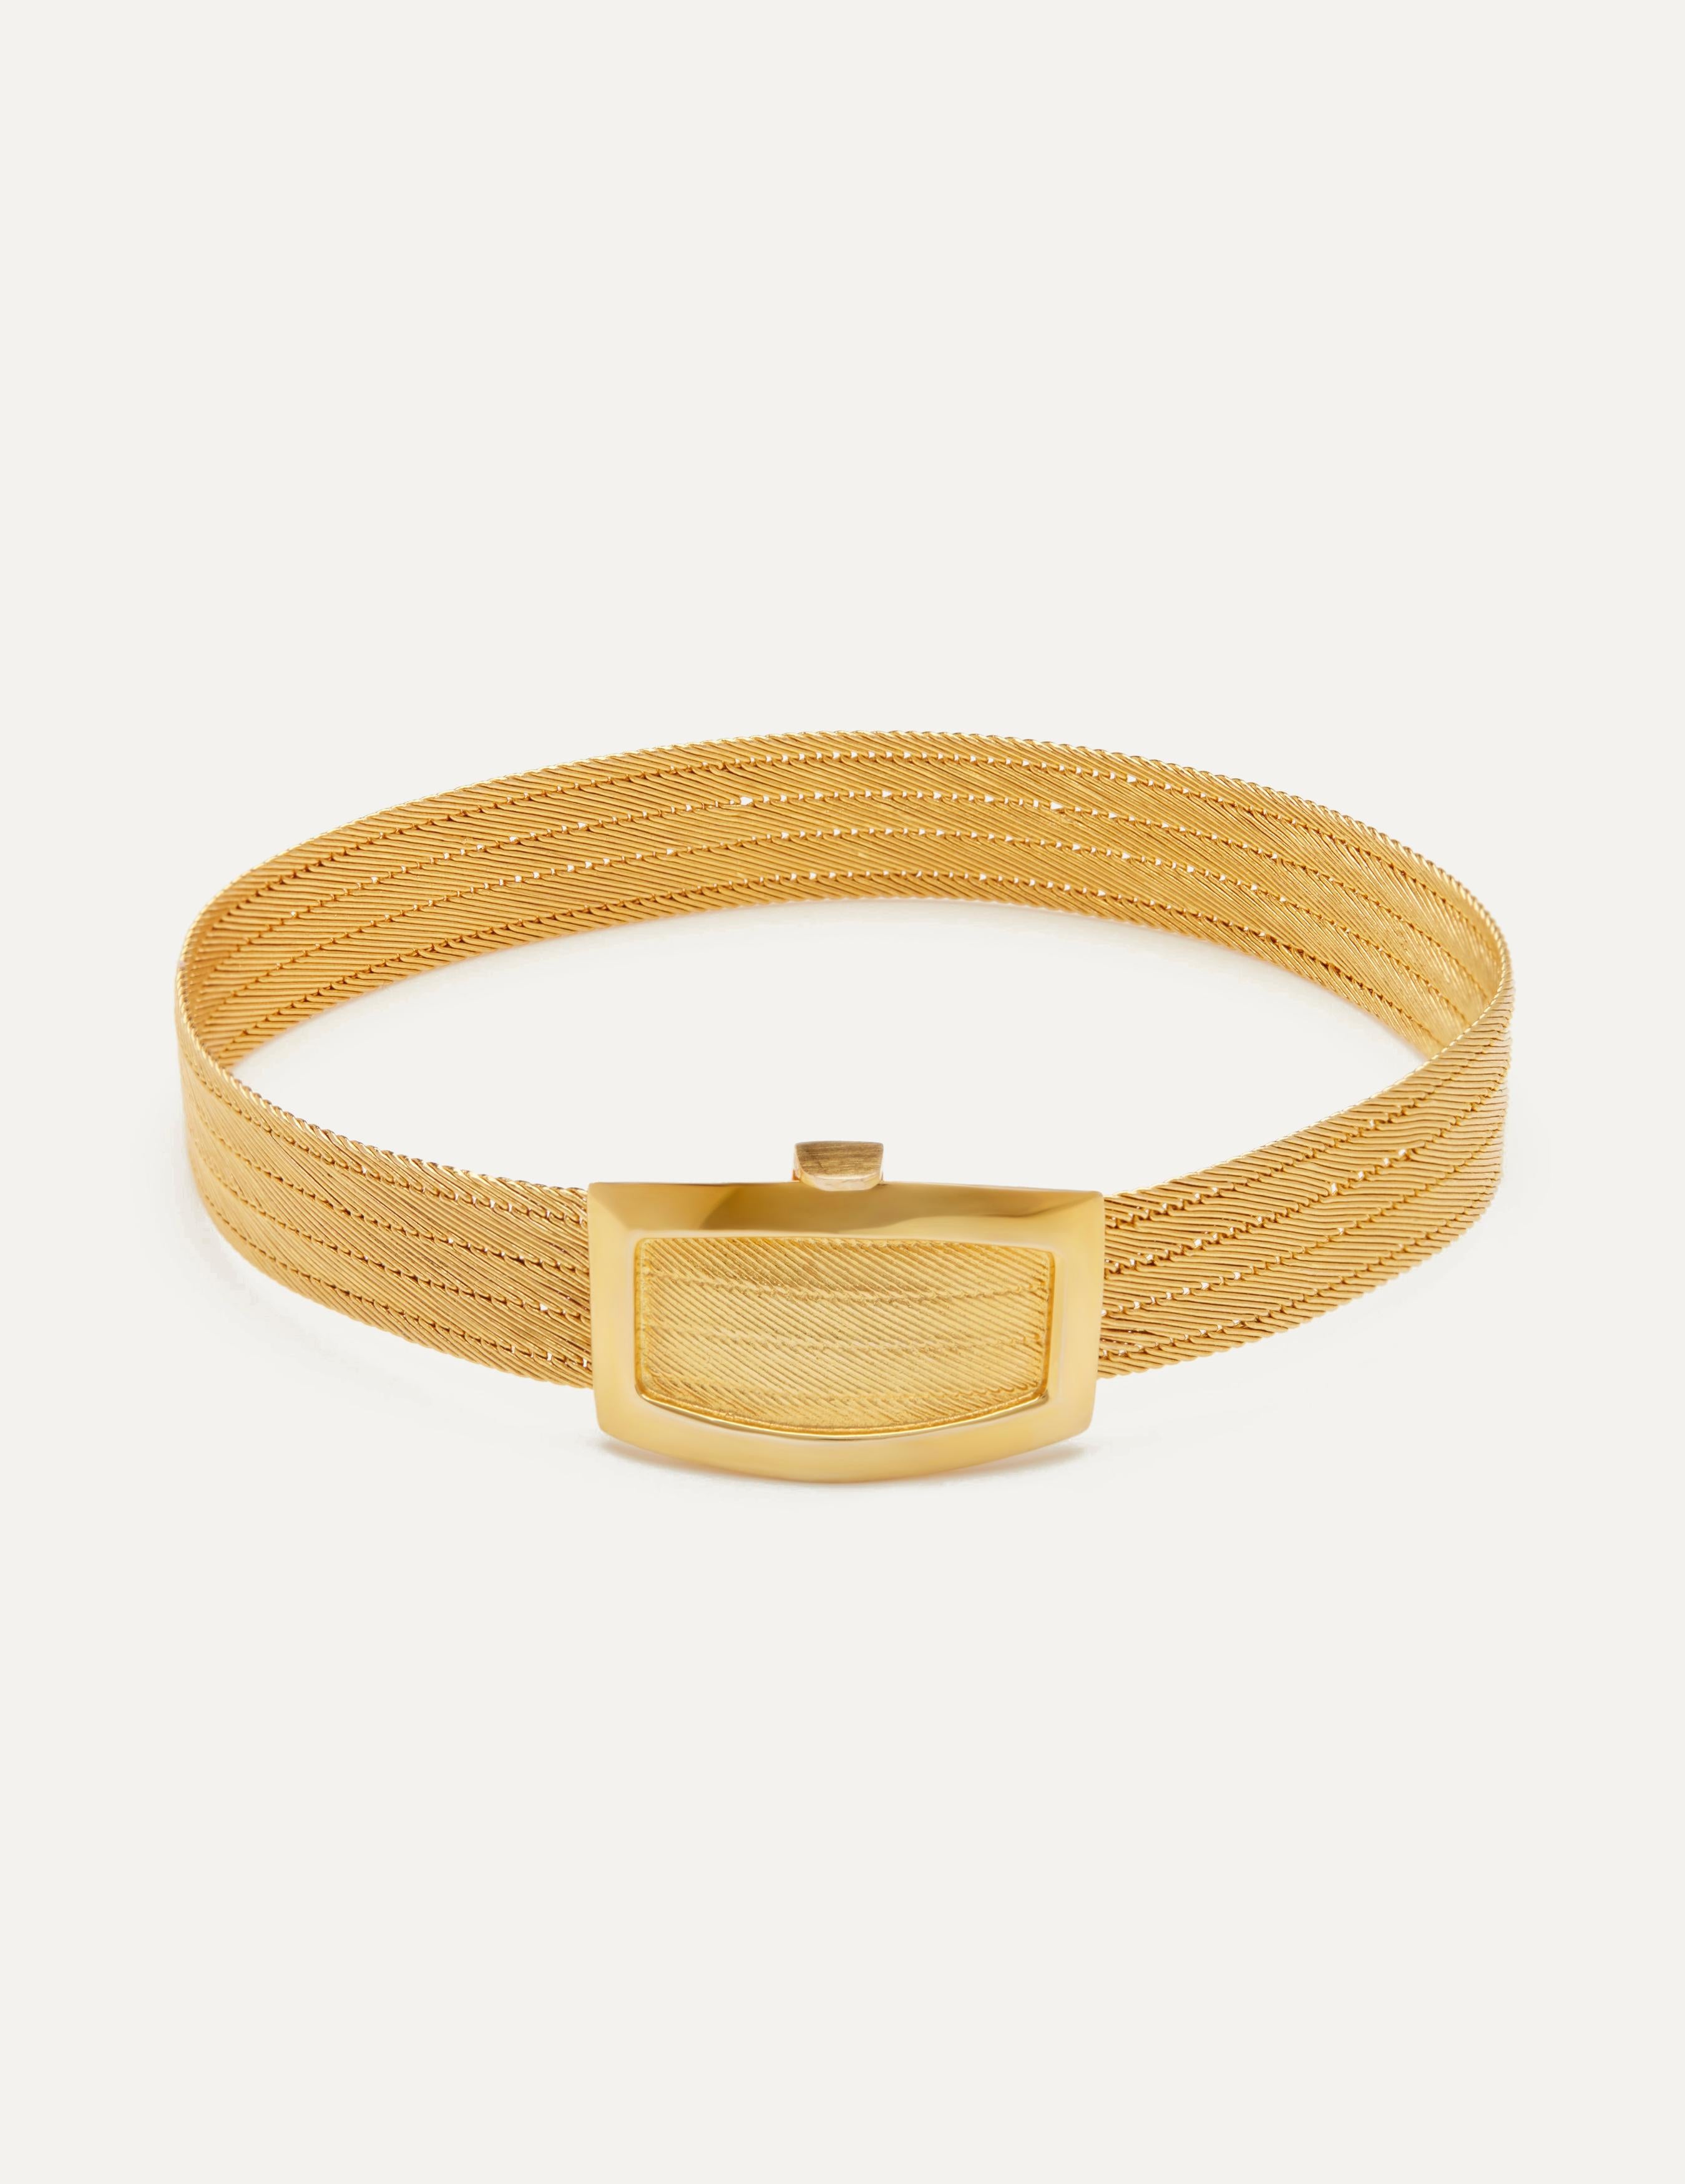 A luxurious and eye-catching jewelry piece that exudes elegance and sophistication. Crafted from lustrous 14k gold, this bracelet is designed to make a bold statement. Its substantial width adds to its commanding presence, making it a striking